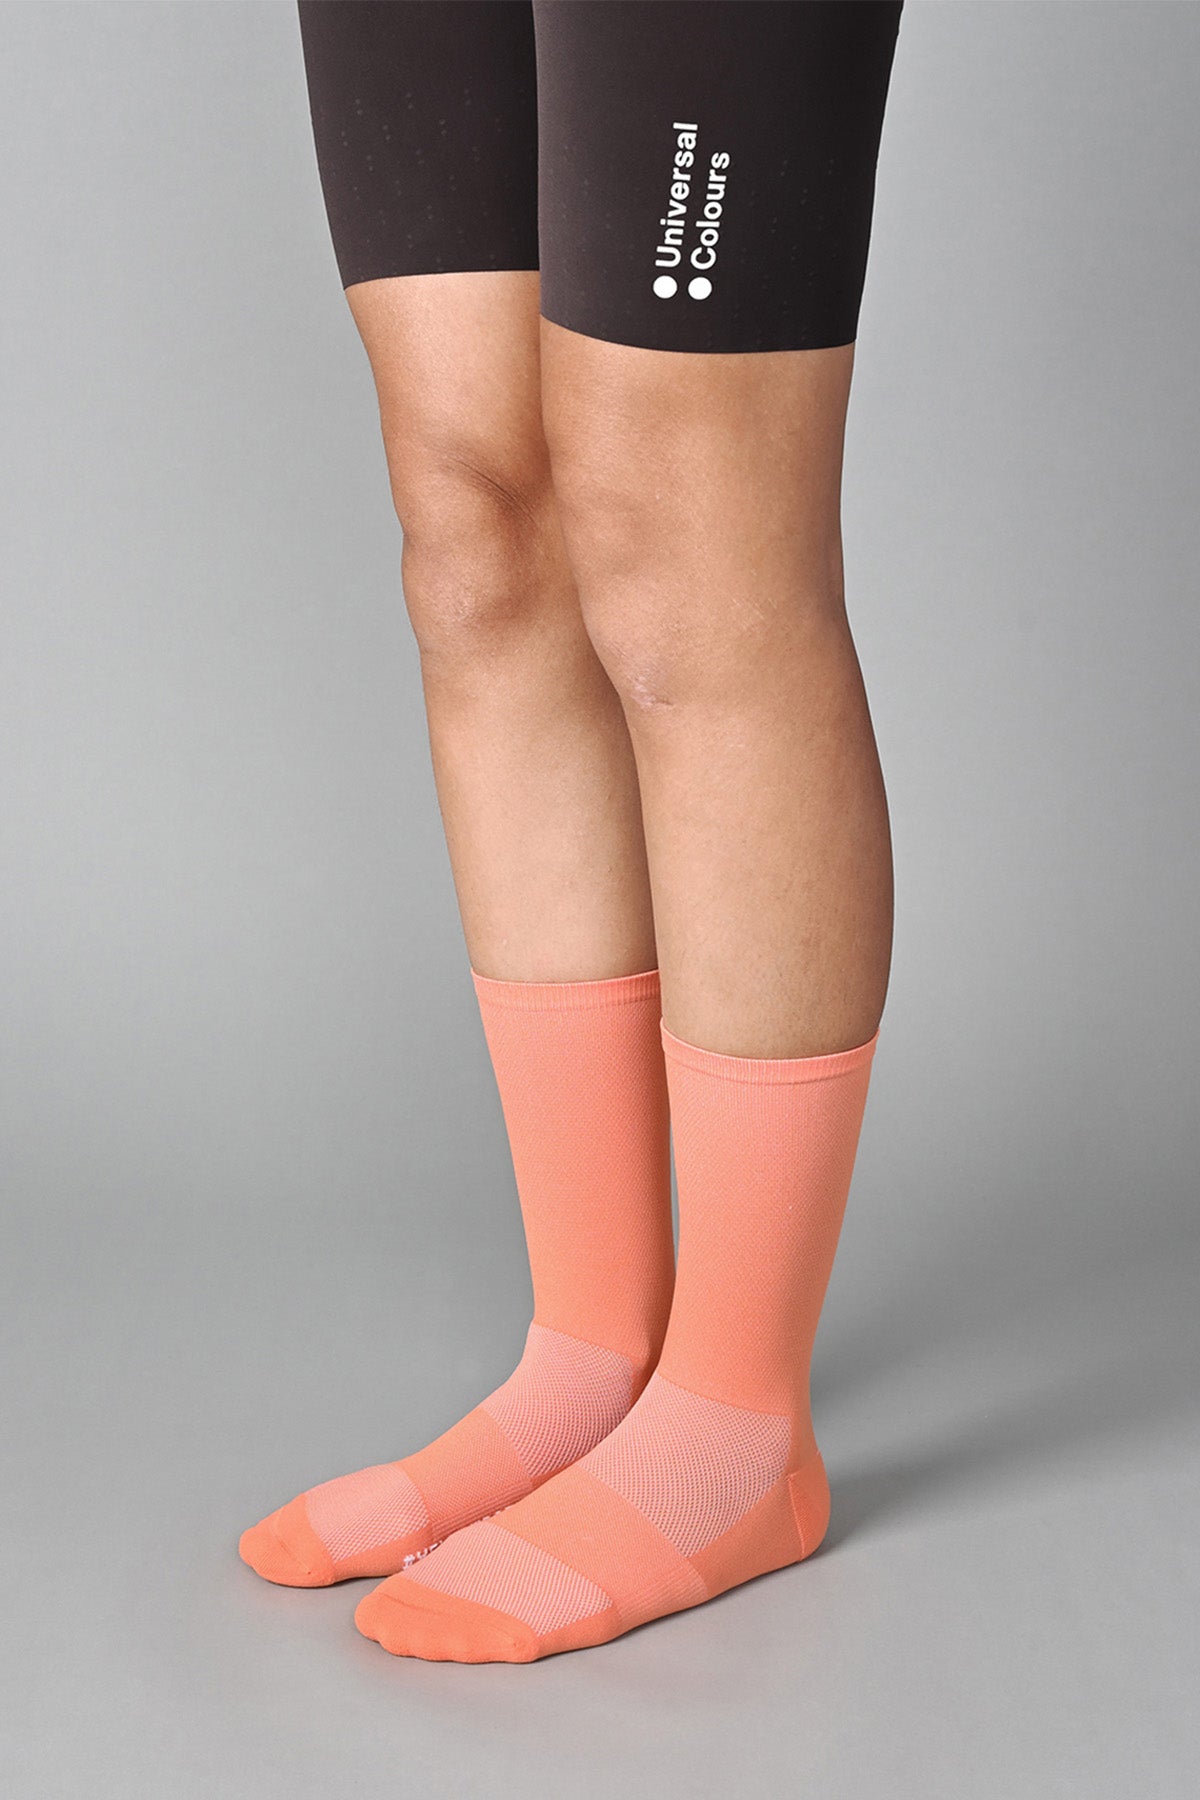 STEALTH - ATOMIC TANGERINE FRONT SIDE | BEST CYCLING SOCKS